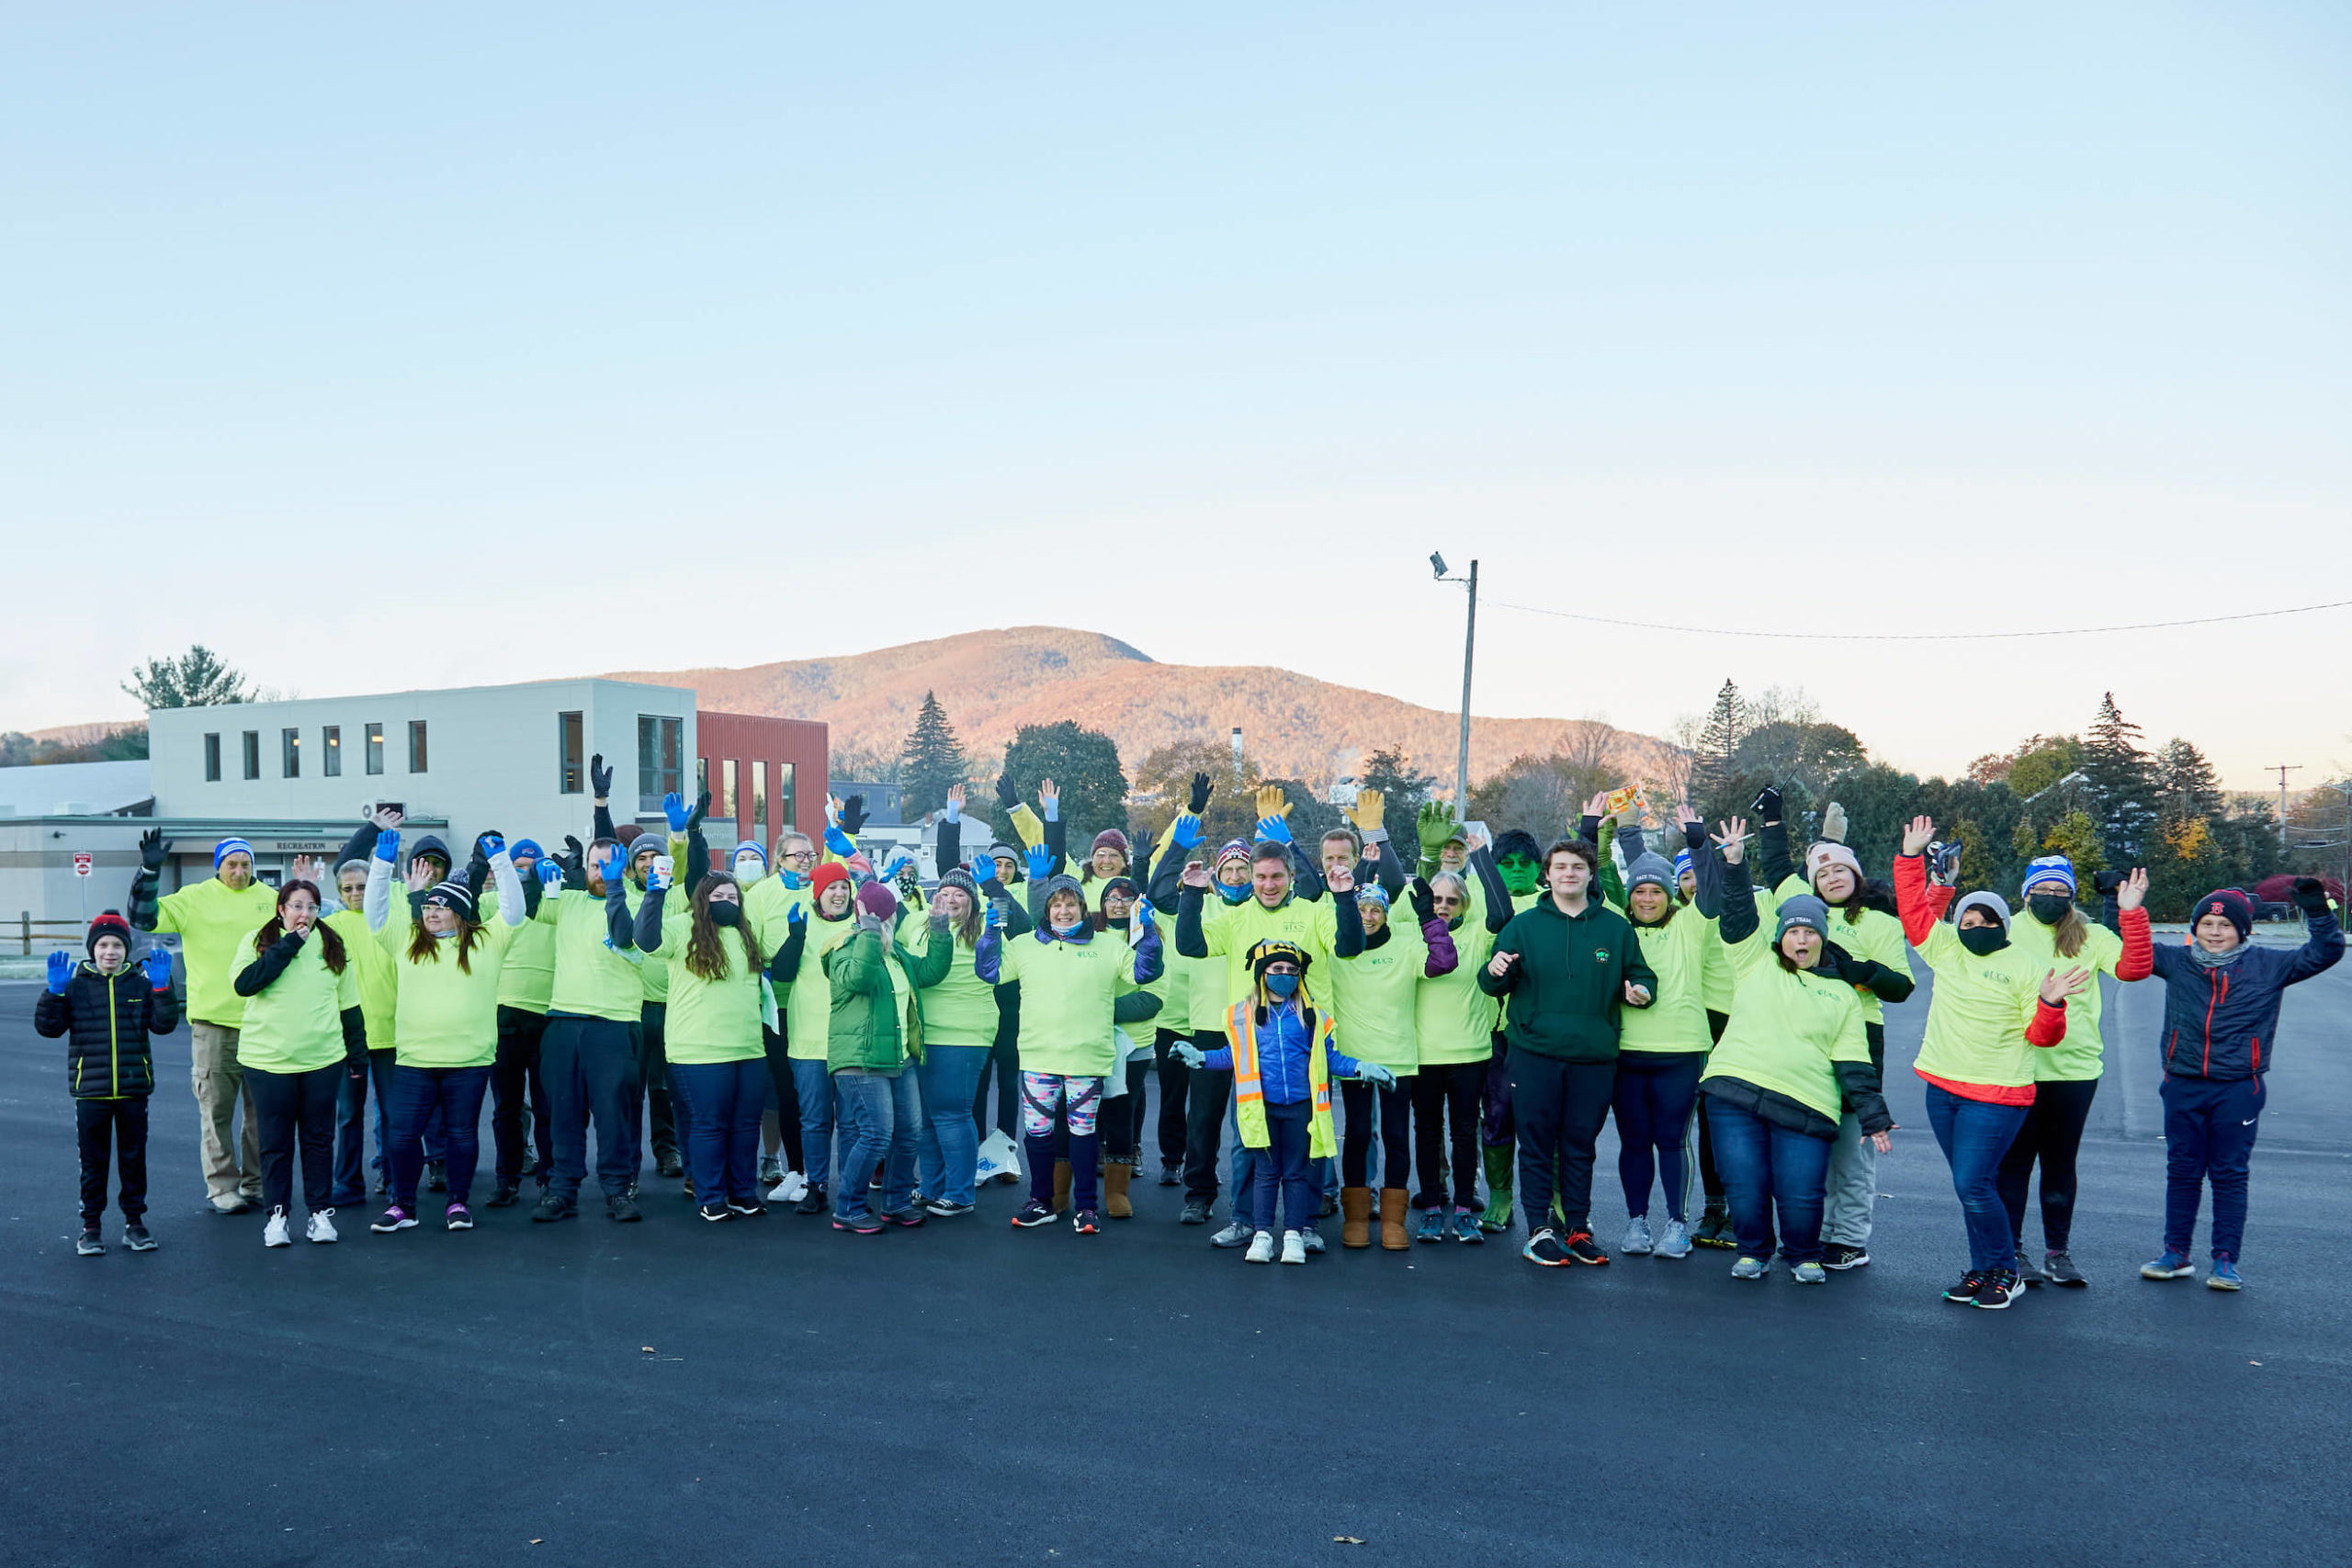 A large group of 5K volunteers wearing bright green shirts waves at the camera with Mt. Anthony and the UCS Spring Center in the background